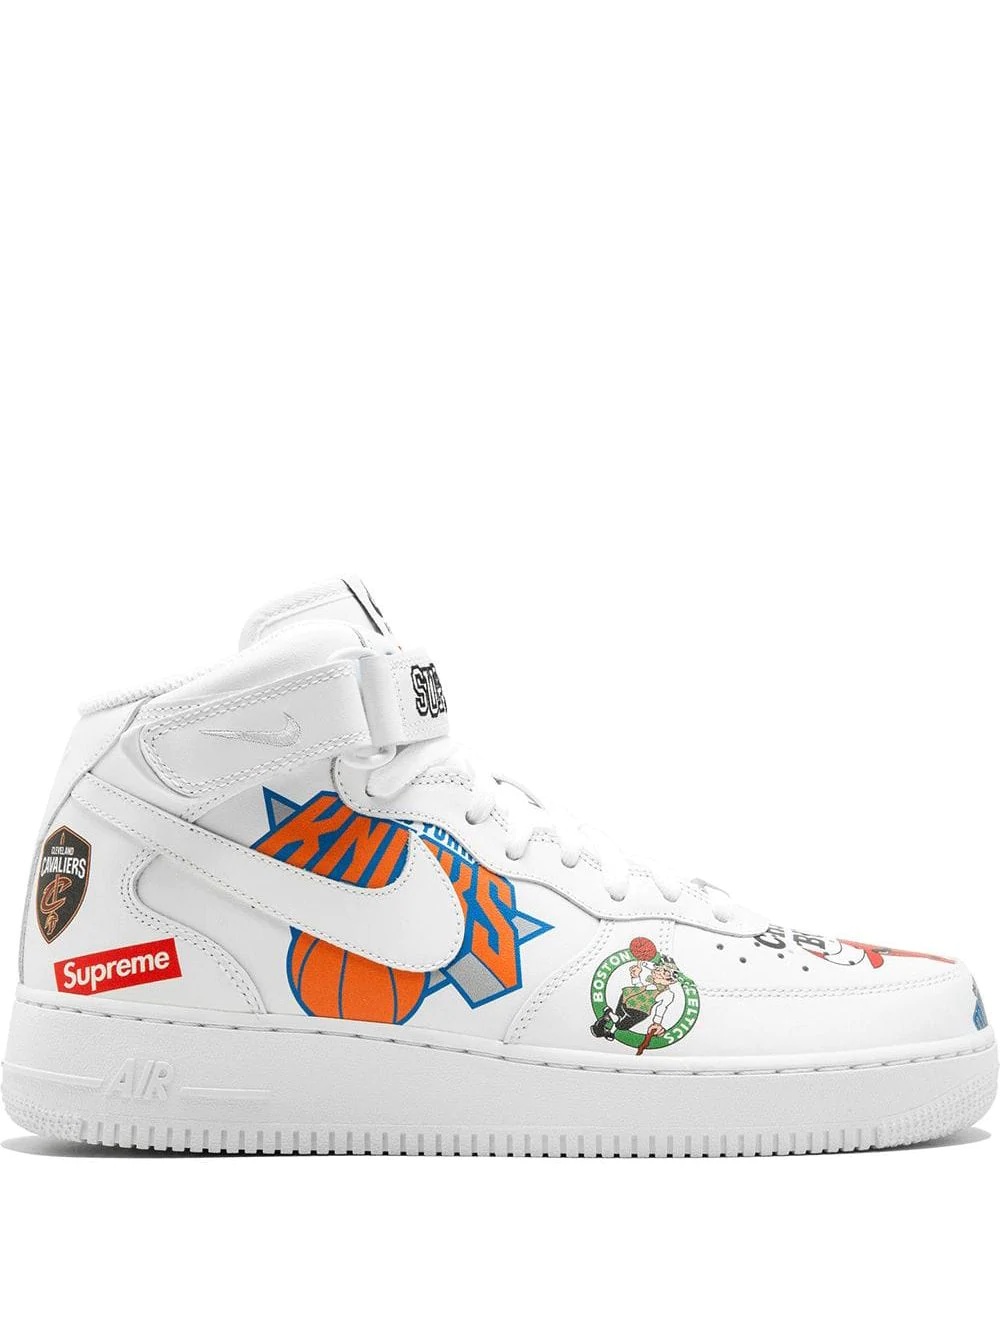 x Supreme x NBA x Air Force 1 MID 07 sneakers - 1